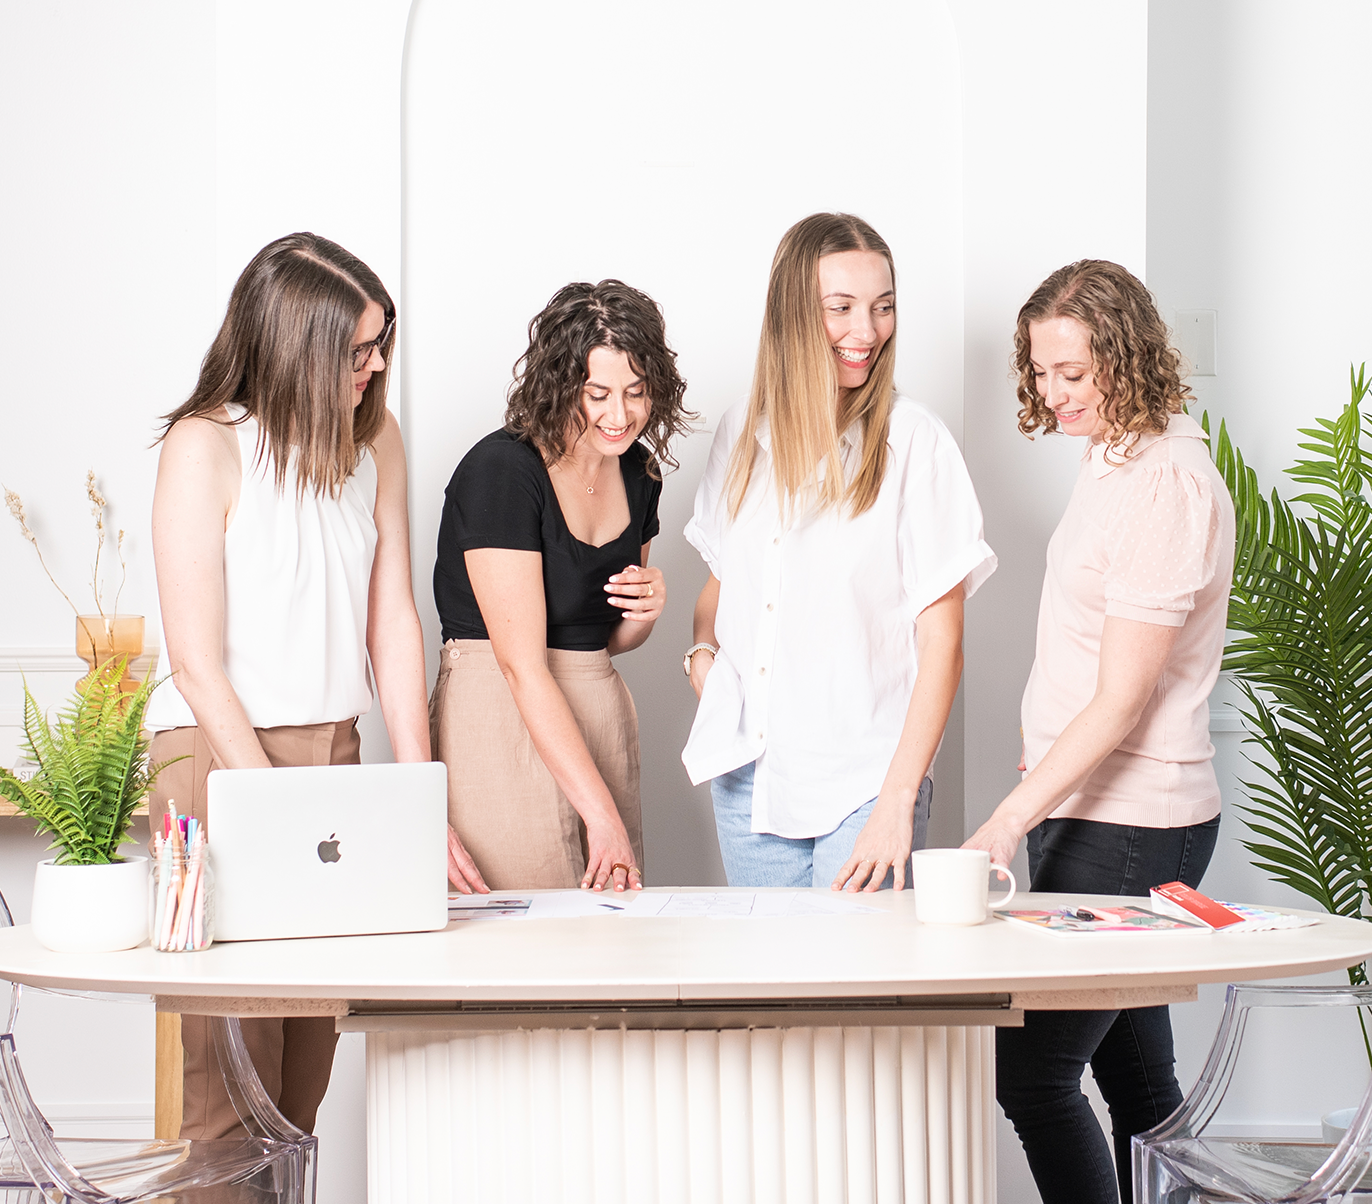 The Inkling Design team gathered around a desk collaborating on a project